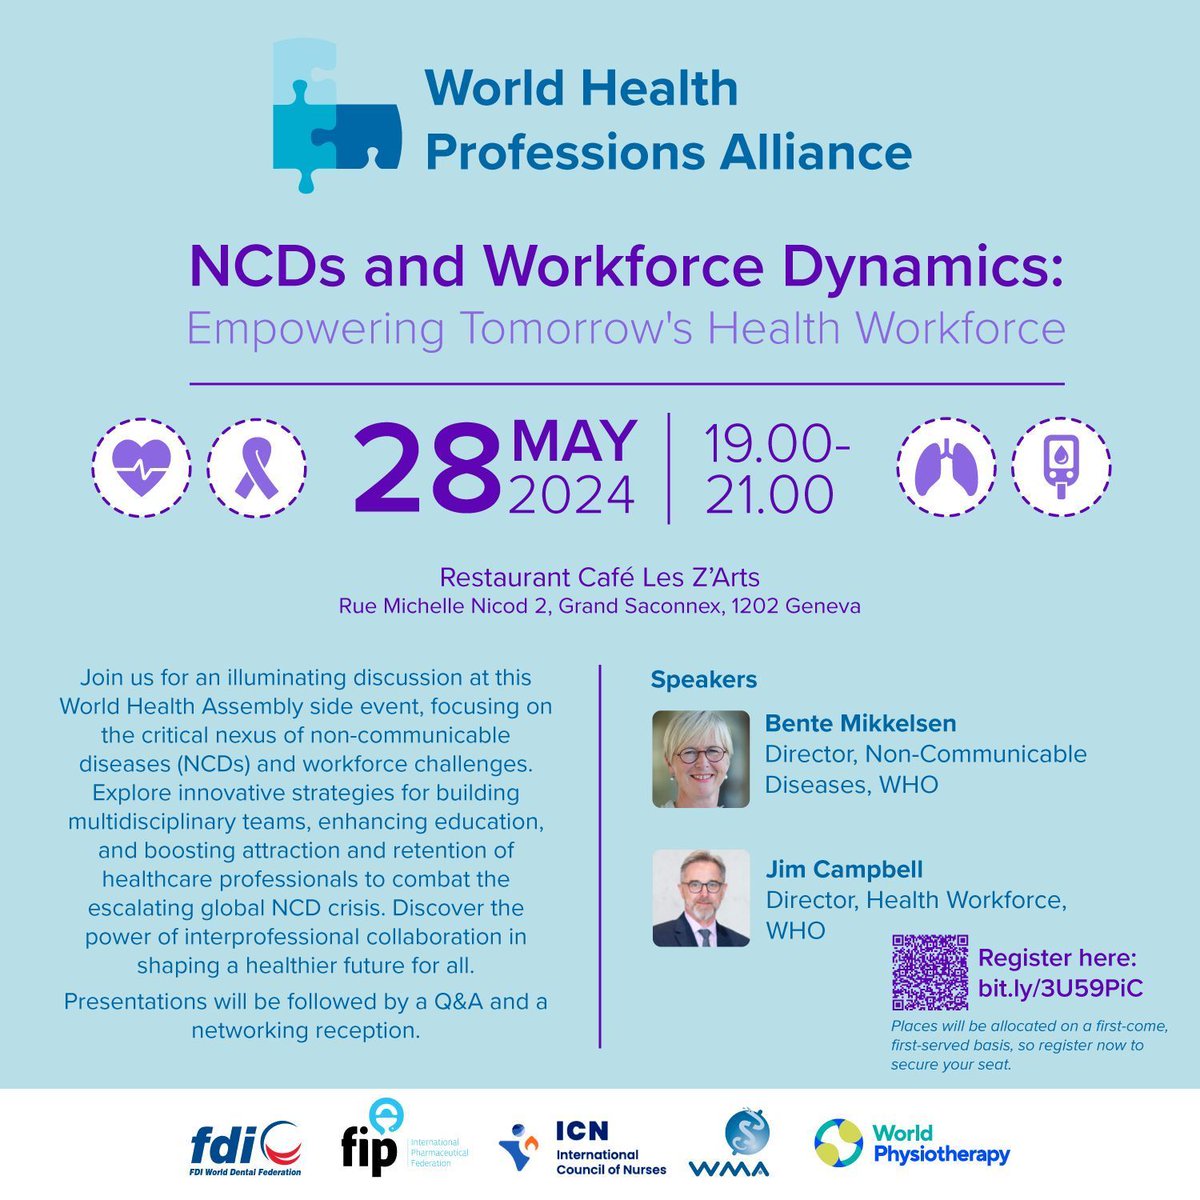 If you're in Geneva for #WHA77, don't miss our side event on #NCDs and #healthworkforce !
Register here before limited places at this in-person event on 28 May are taken up: buff.ly/3Qytt42 
#interprofessionalcollaboration
#globalhealth
#healthprofessionals